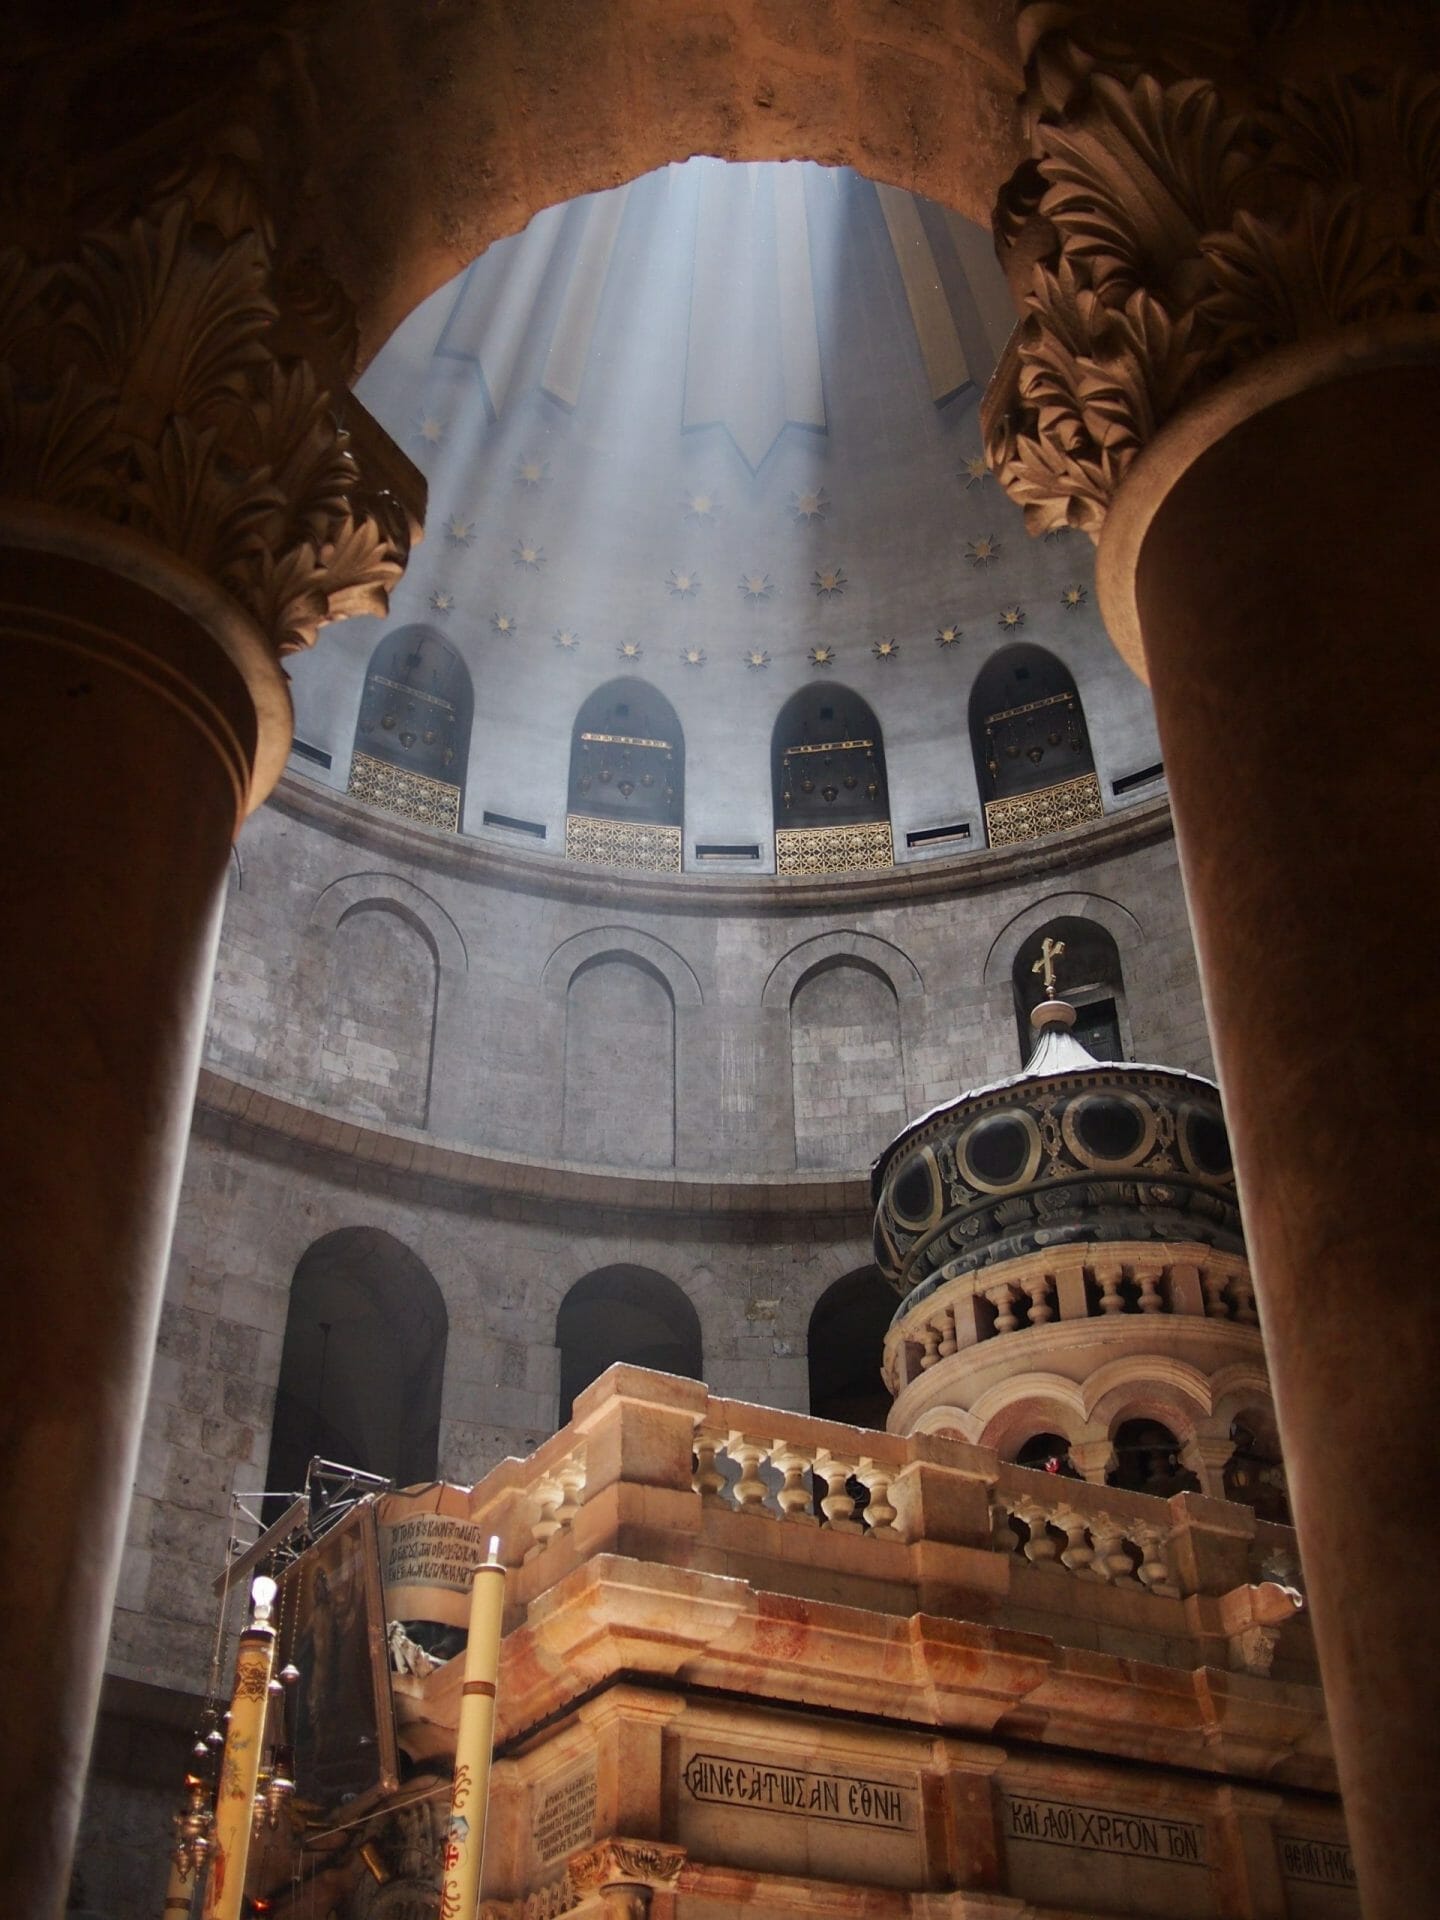 Jerusalem, Israel - 02 June, 2017: Beams of light pierce through the open ceiling inside the Church, illuminating the tomb where Jesus is said to be buried.